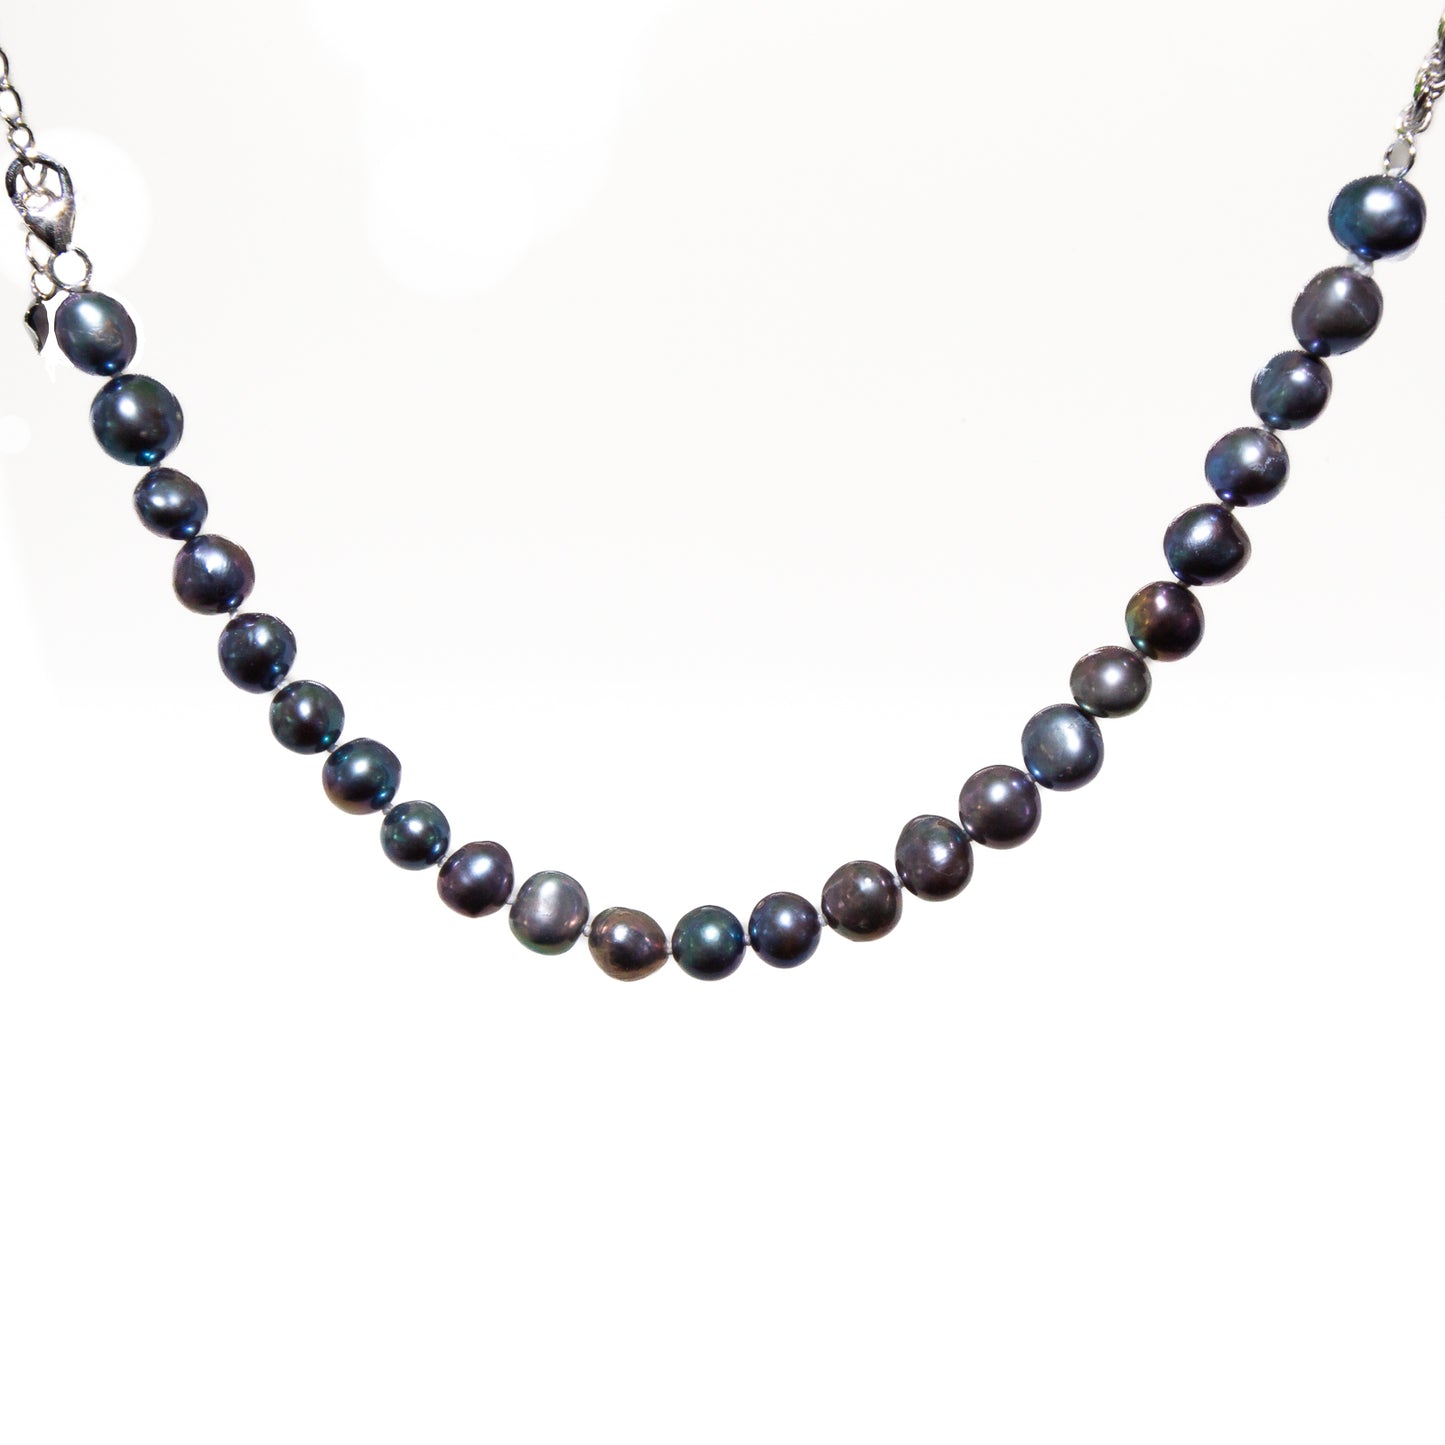 Azure Majesty Baroque Pearl Strand Necklace